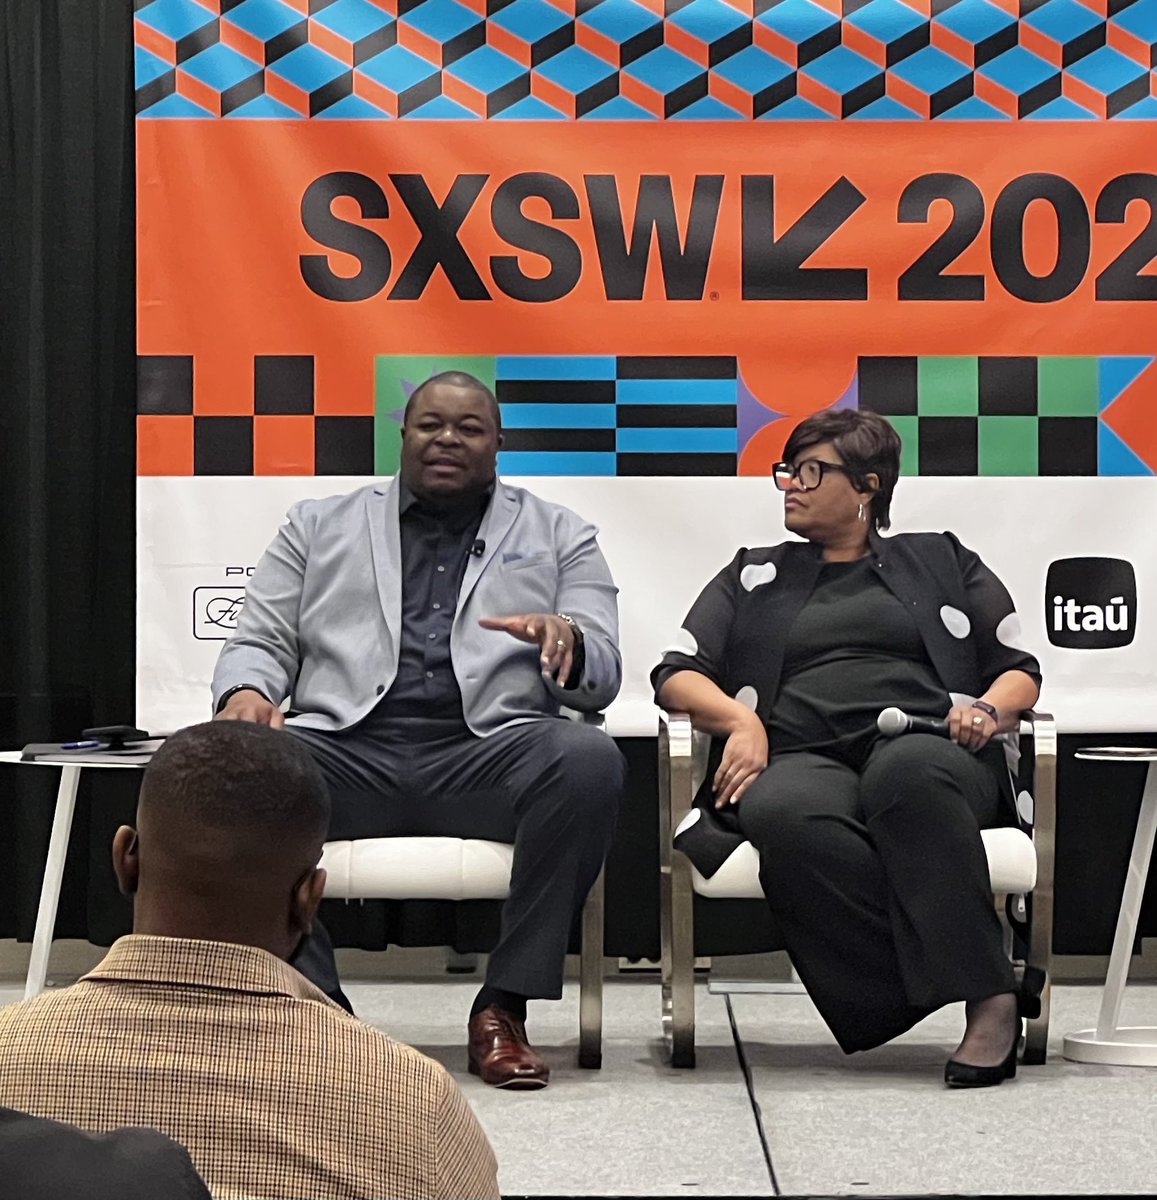 @dhewitt06 from @lawyerscomm at #sxsw, “The election of @barackobama created a false narrative of post-racism…From the founding, racial discrimination is the baseline for America.” @GFMediaOrg